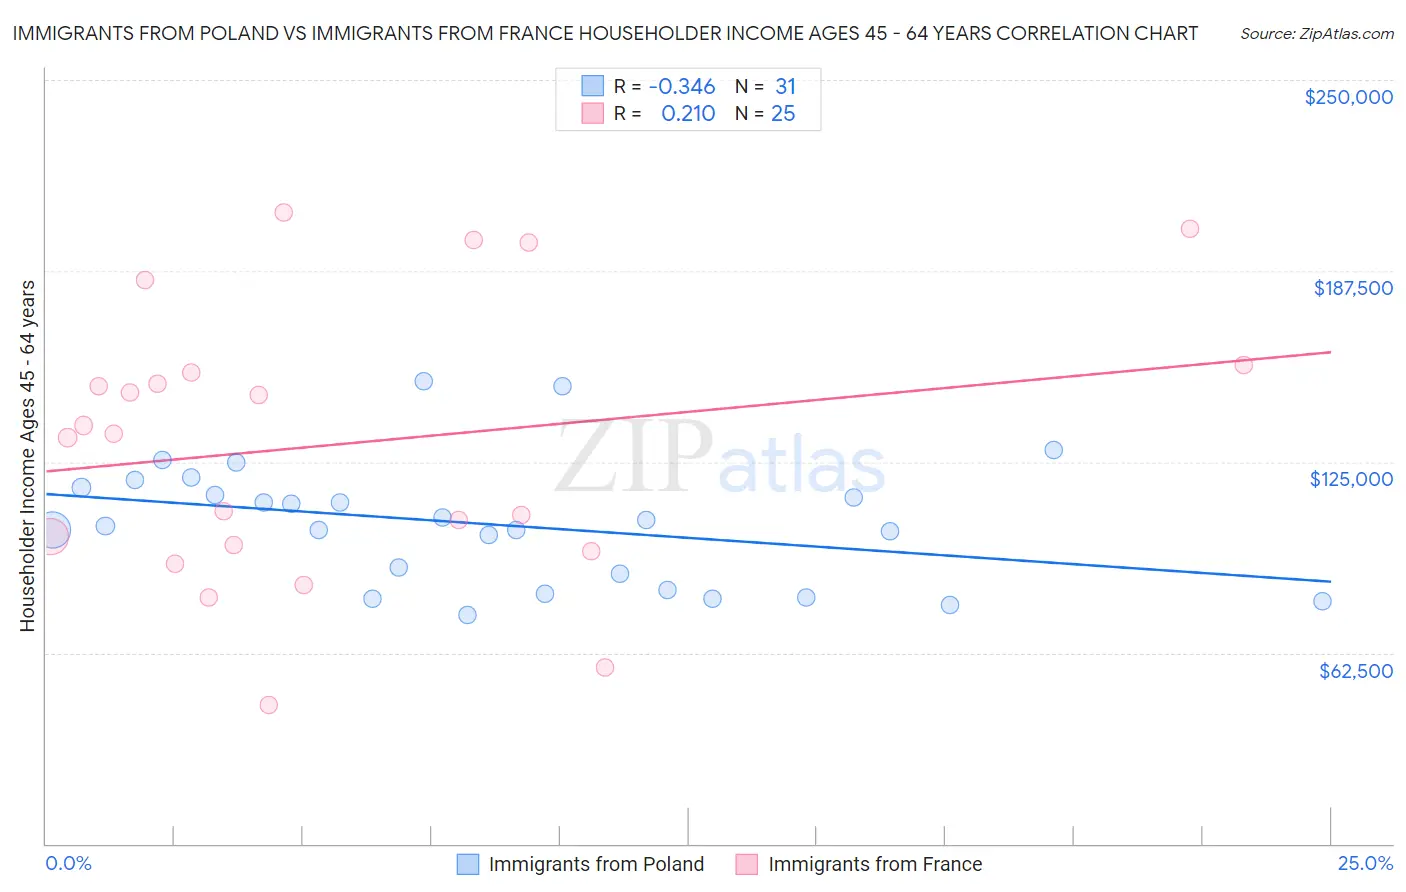 Immigrants from Poland vs Immigrants from France Householder Income Ages 45 - 64 years